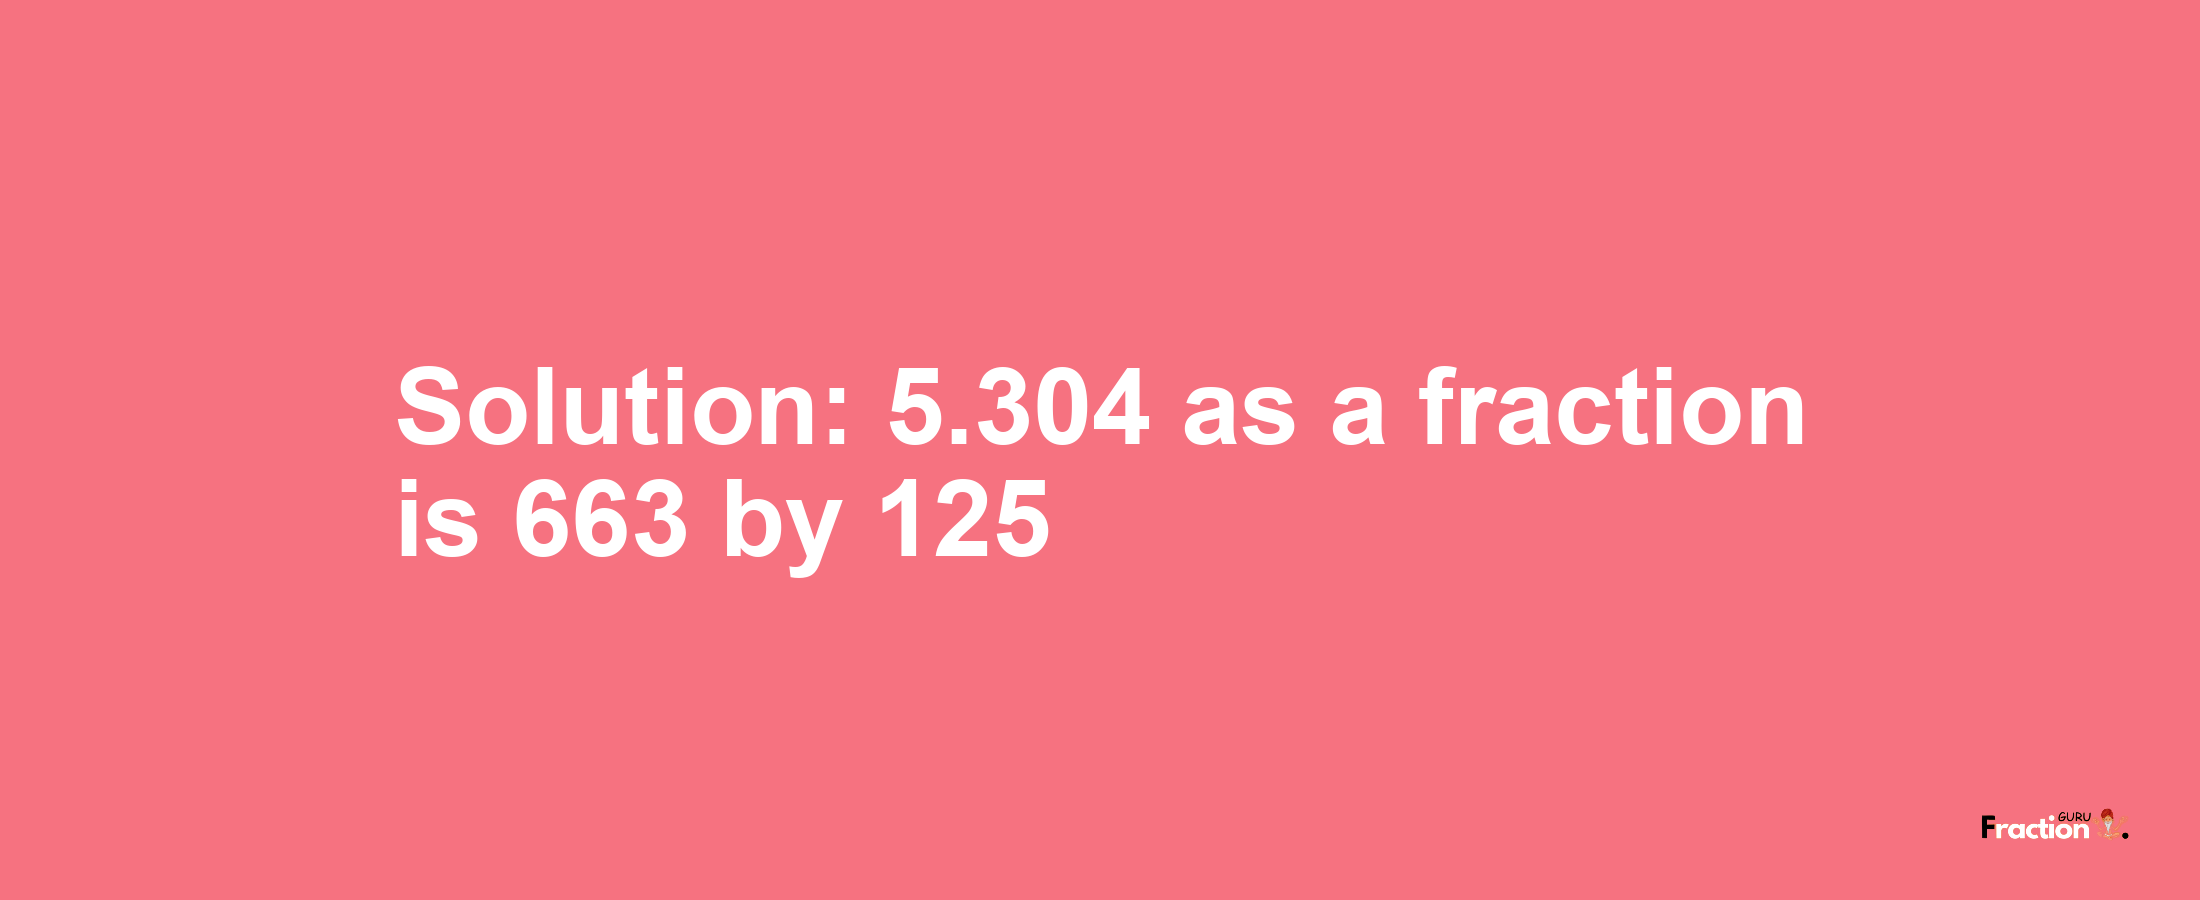 Solution:5.304 as a fraction is 663/125